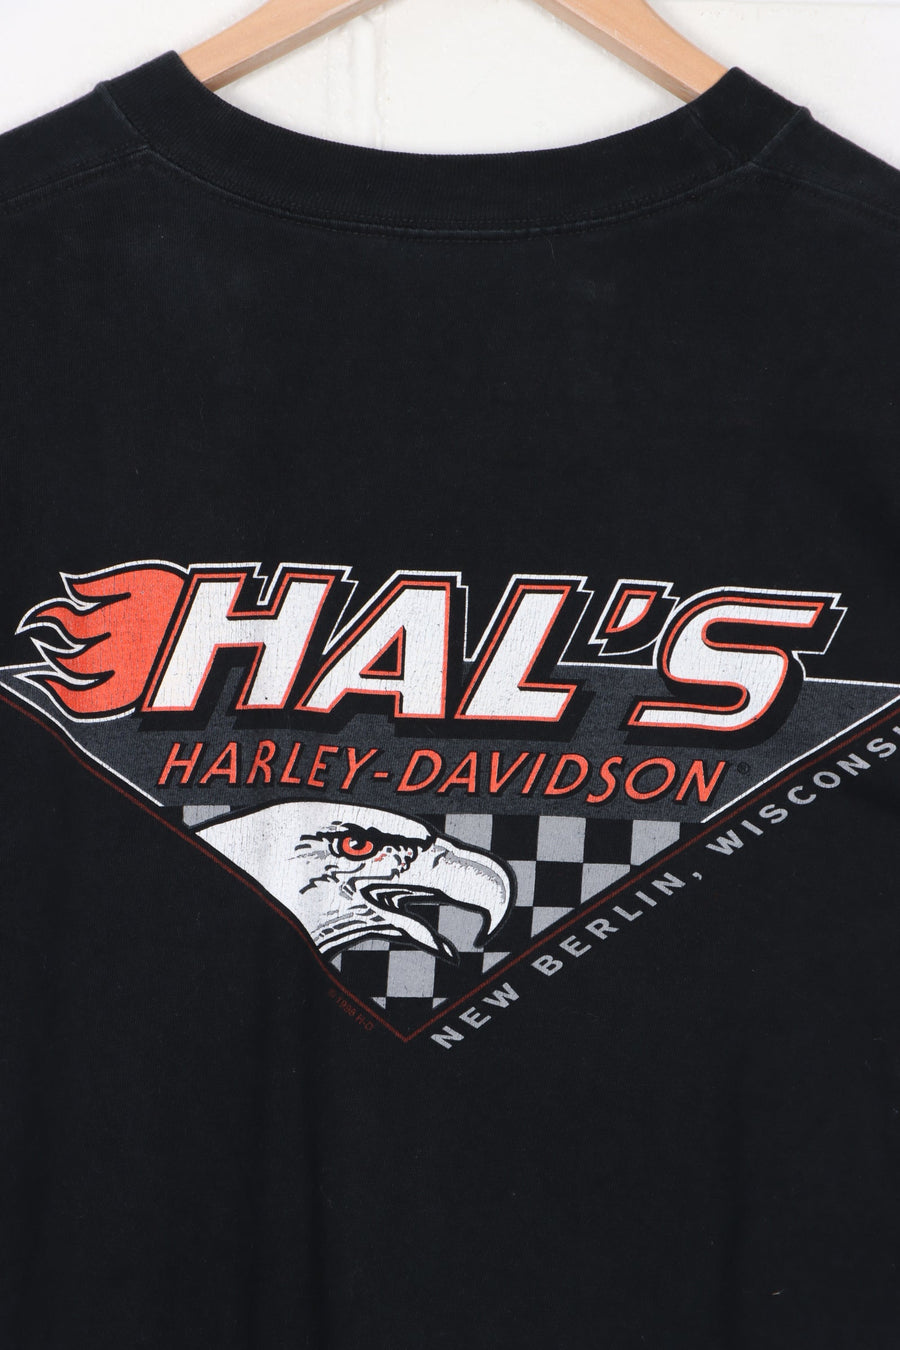 Hal's HARLEY DAVIDSON 100 Years Front Back Long Sleeve T-Shirt USA Made (M-L)